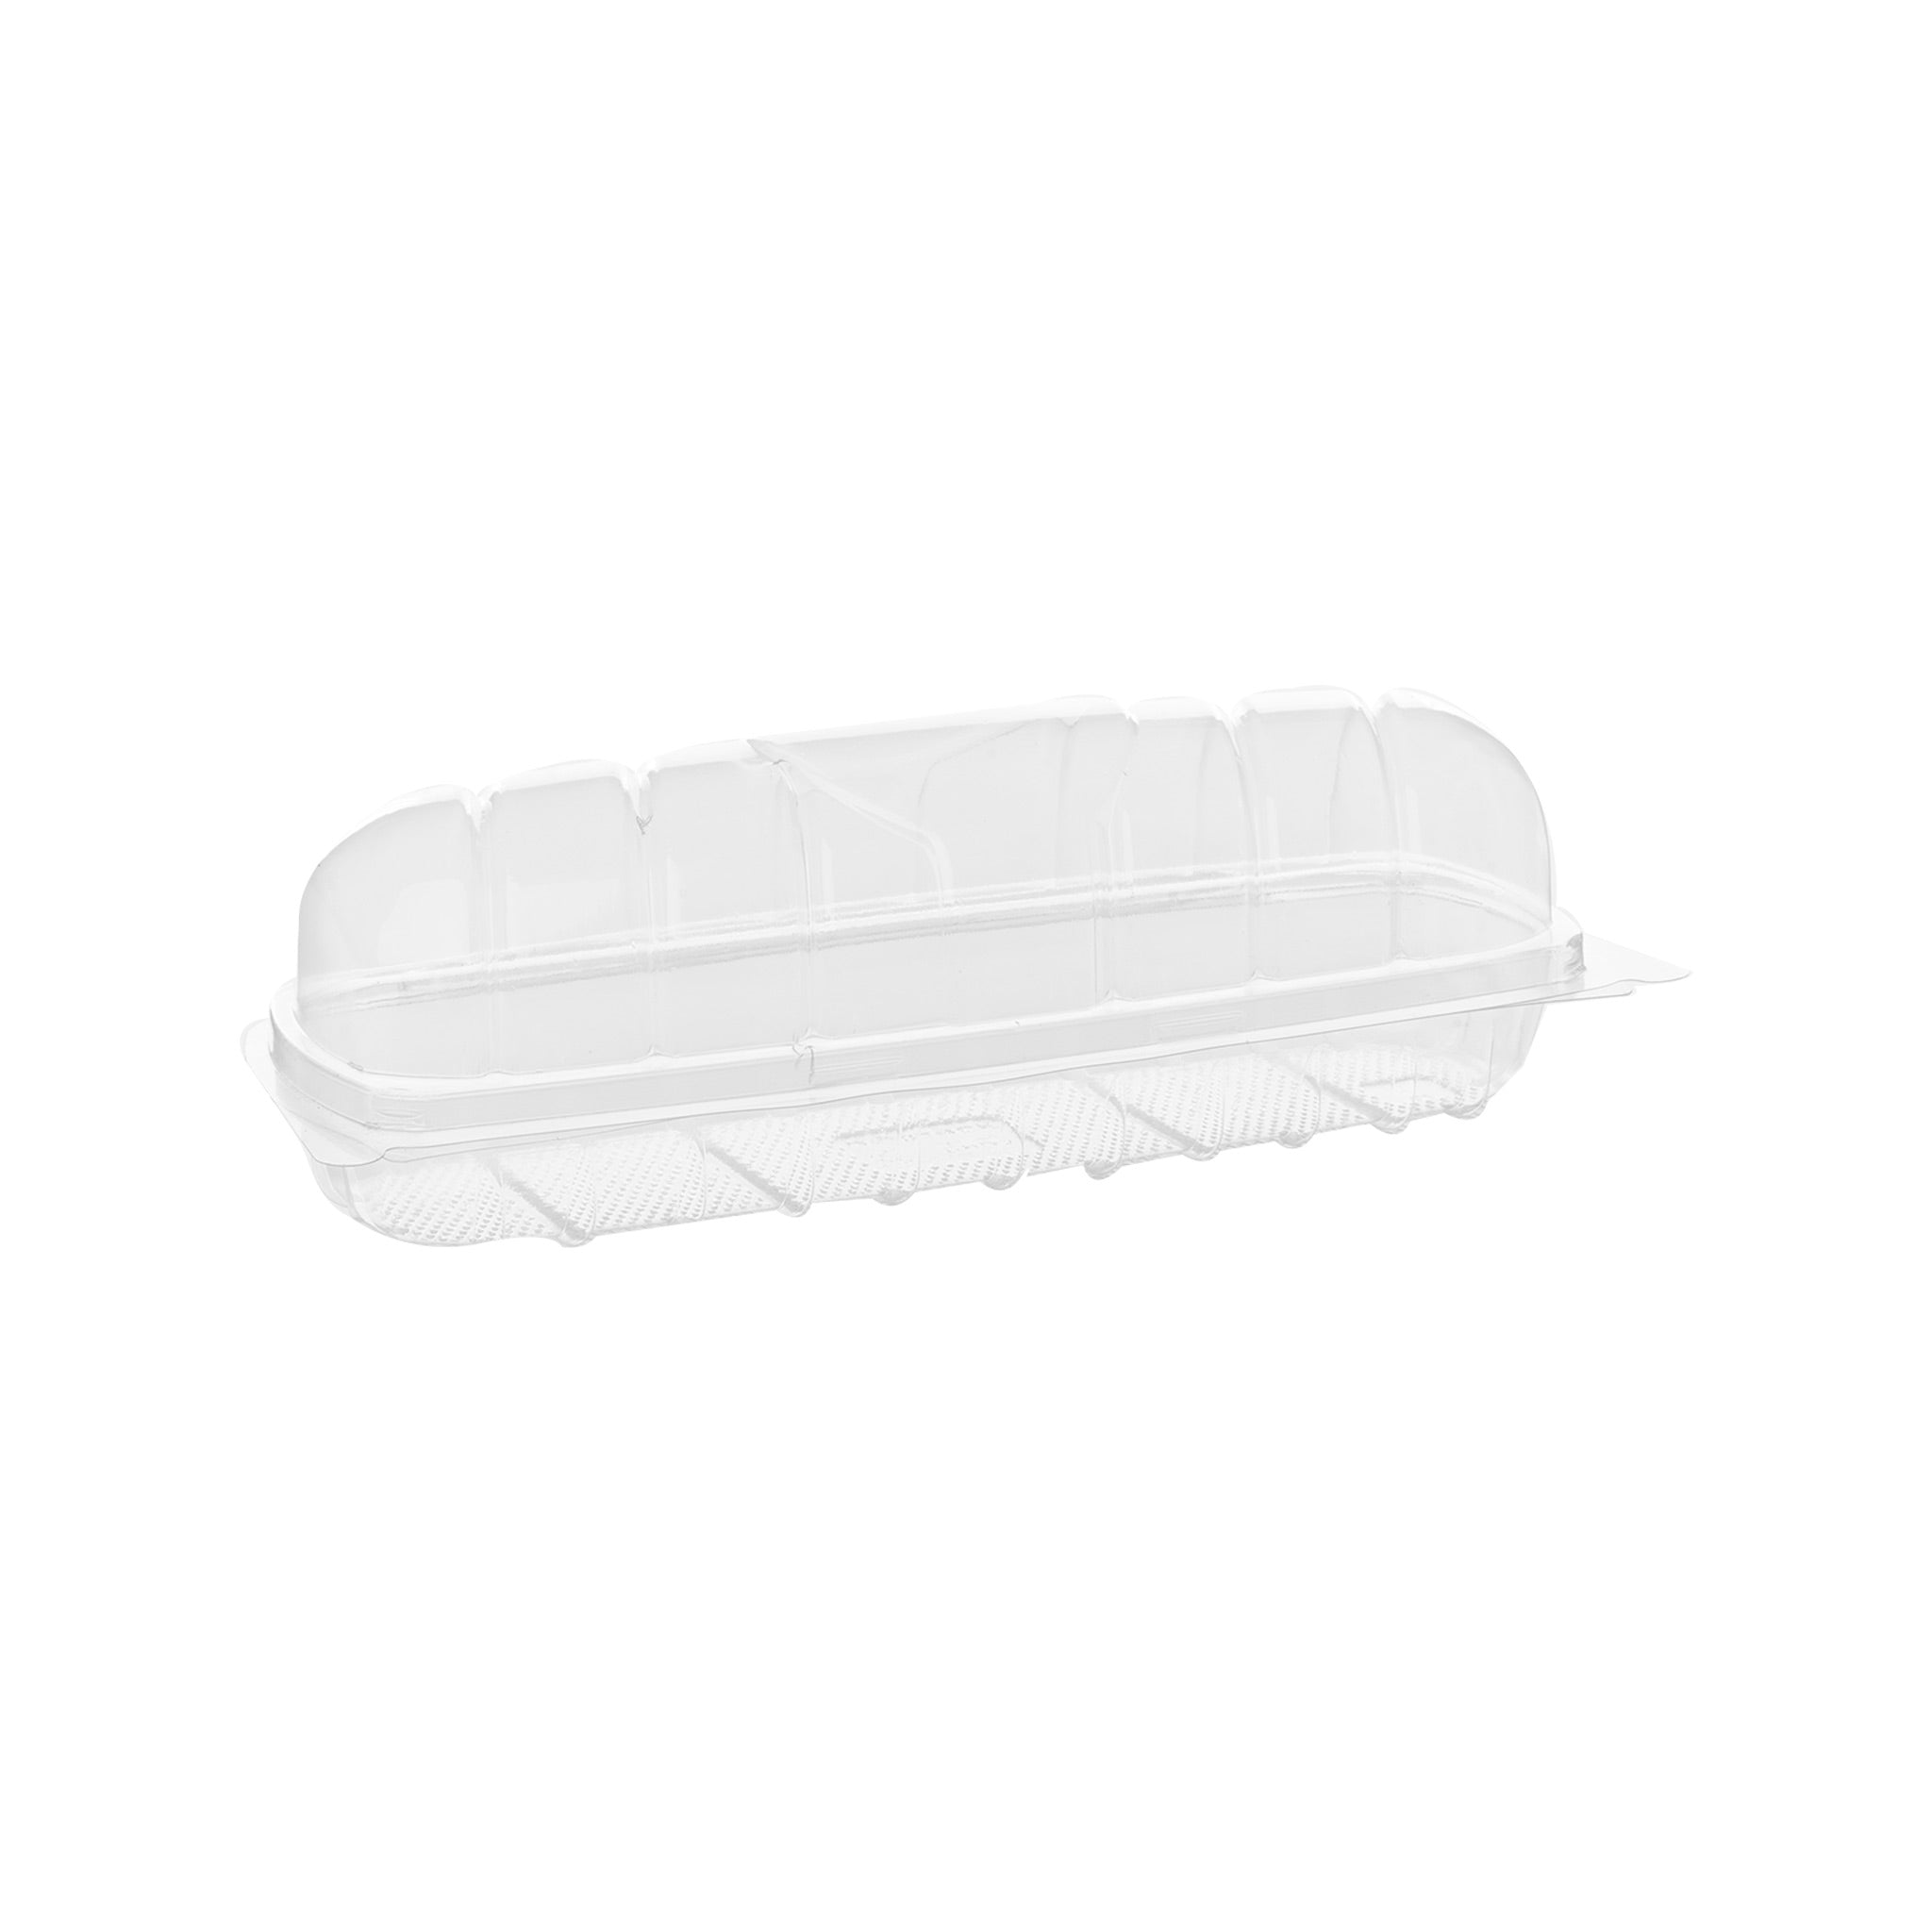 400 Pieces Baguette Container 9 inch - Hotpack Bahrain